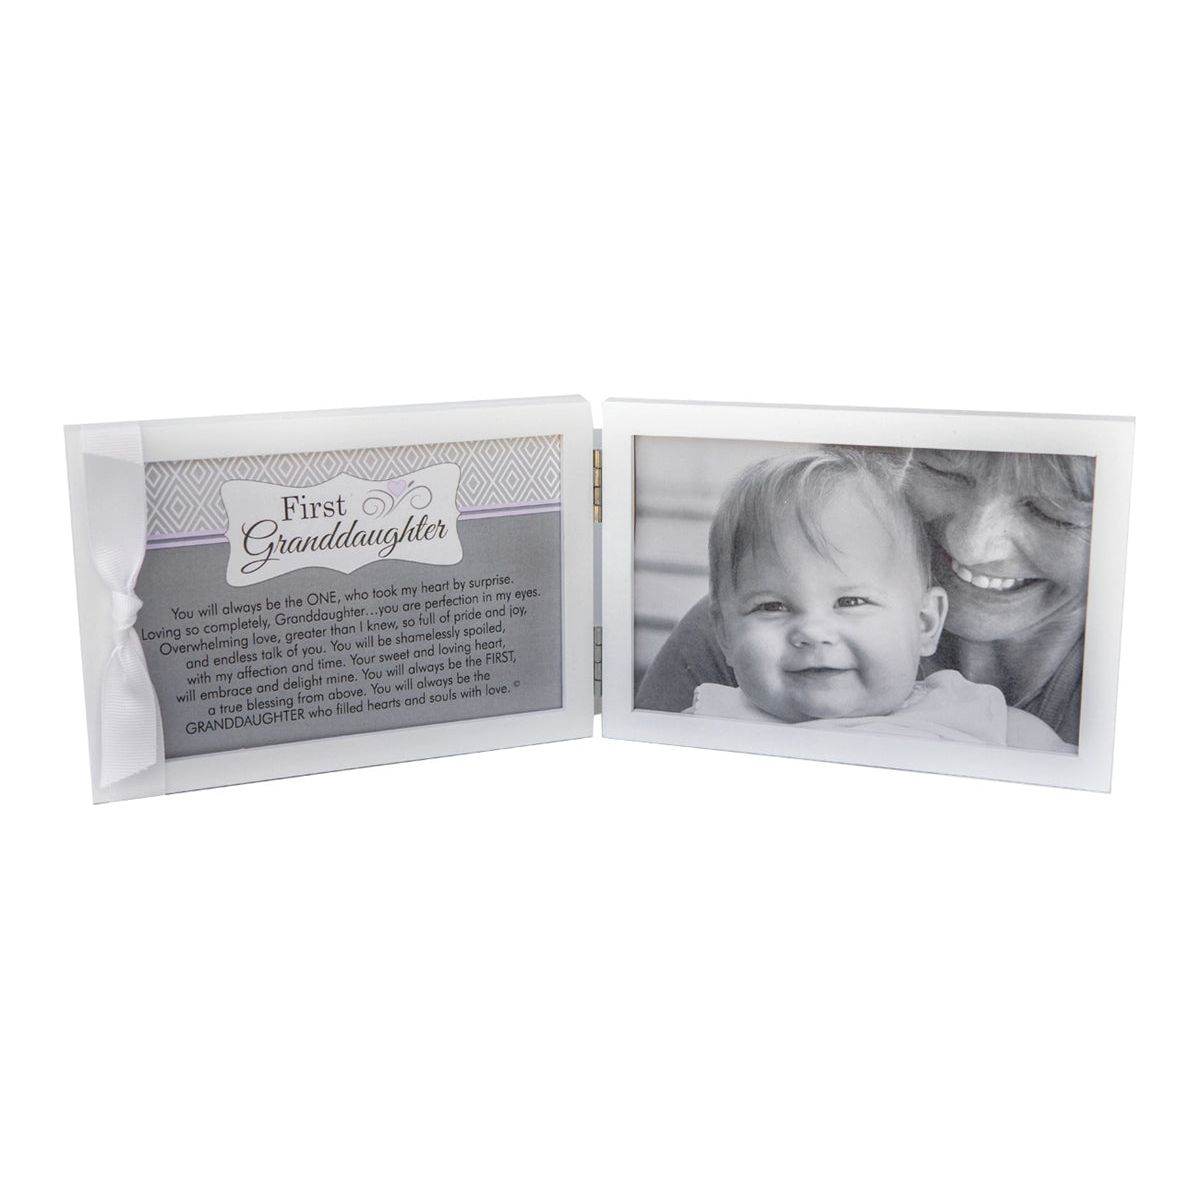 First Granddaughter Photo Frame 4x6